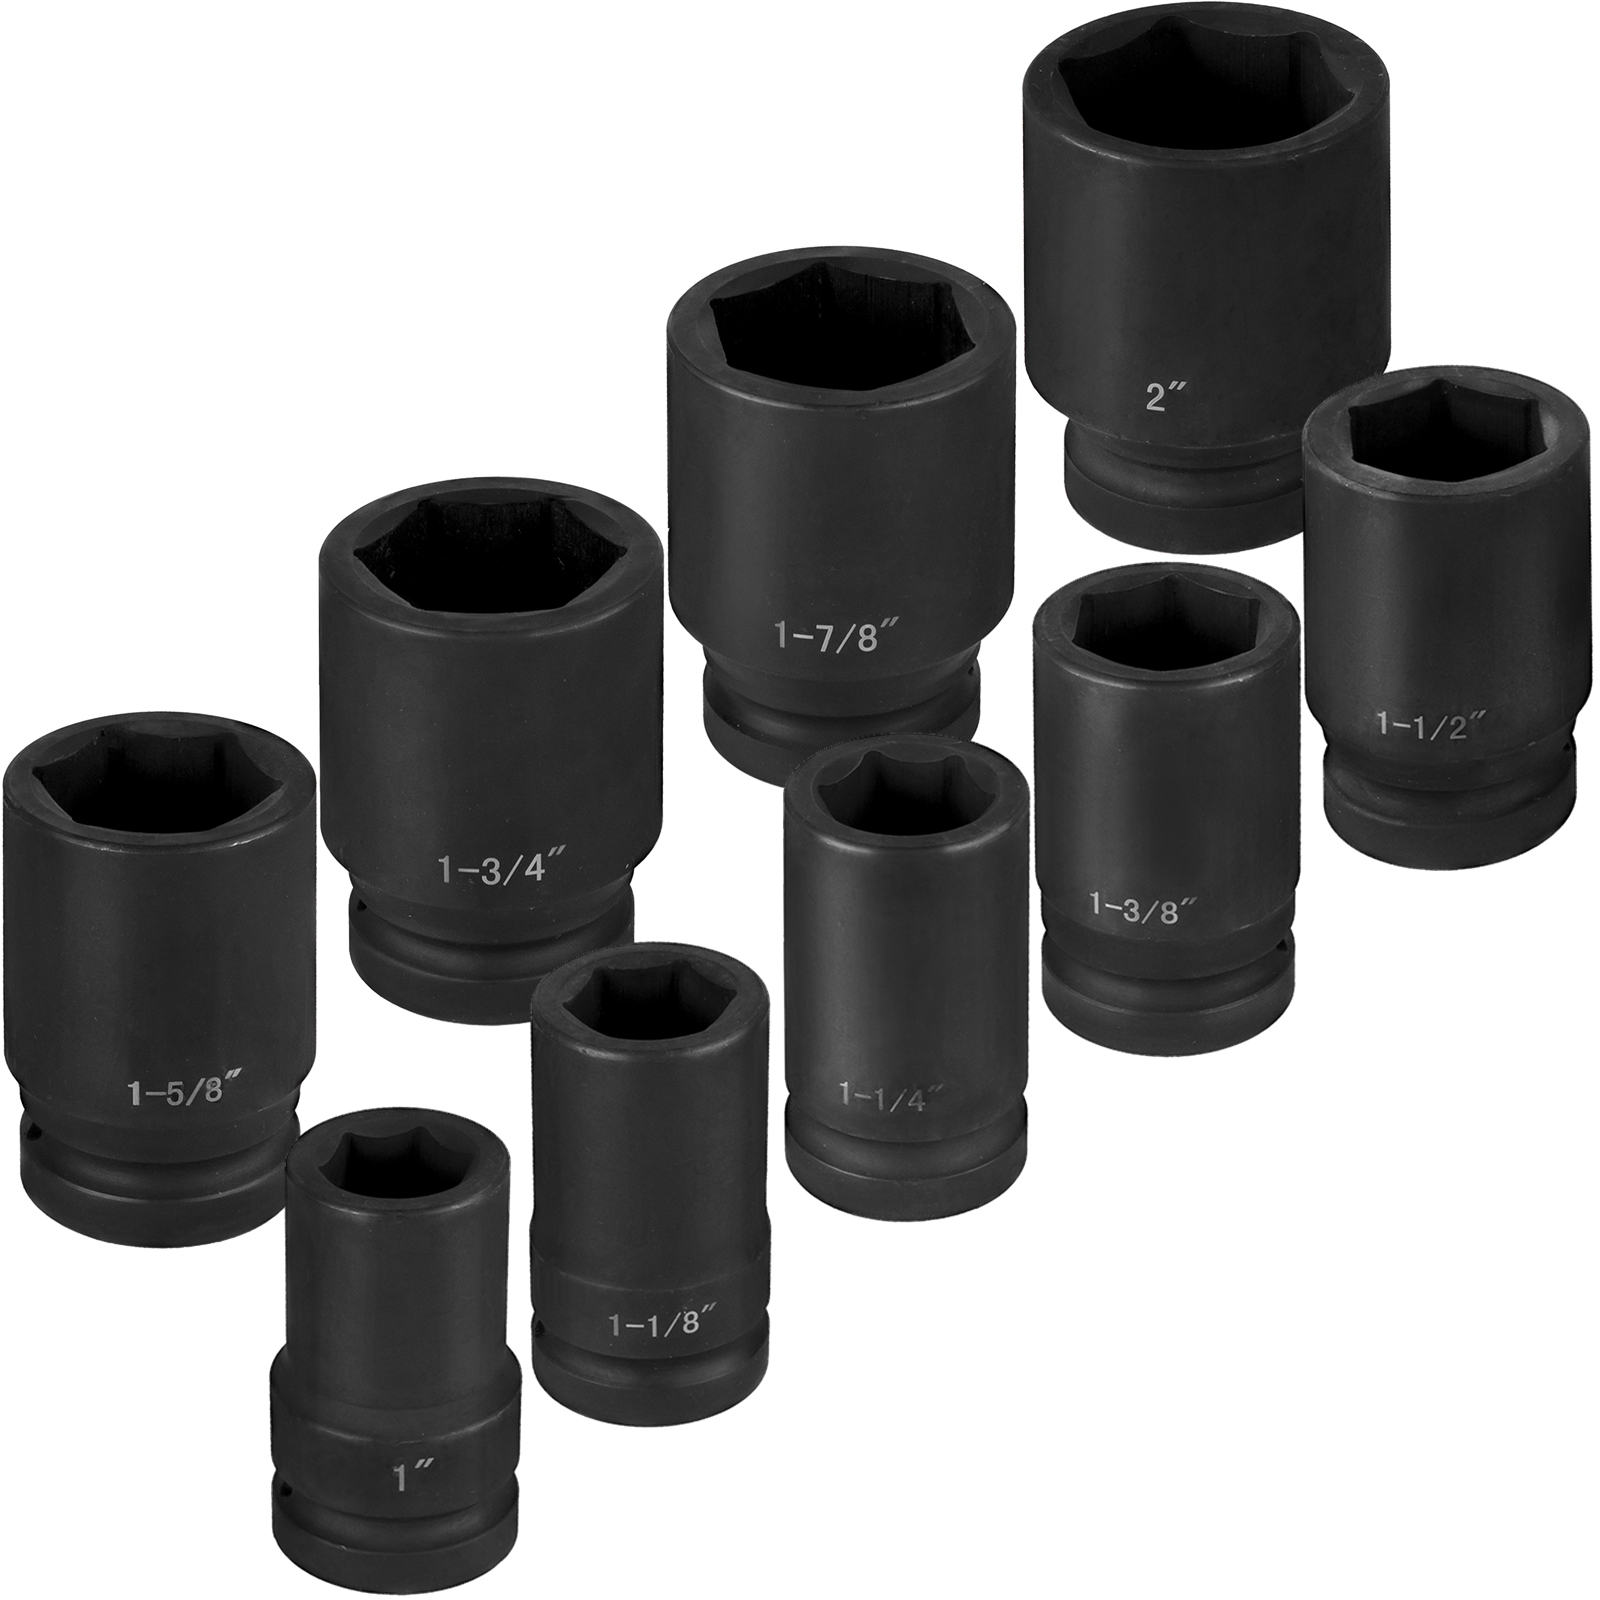 Impact Sockets, 3/4 Inches, 21 Piece